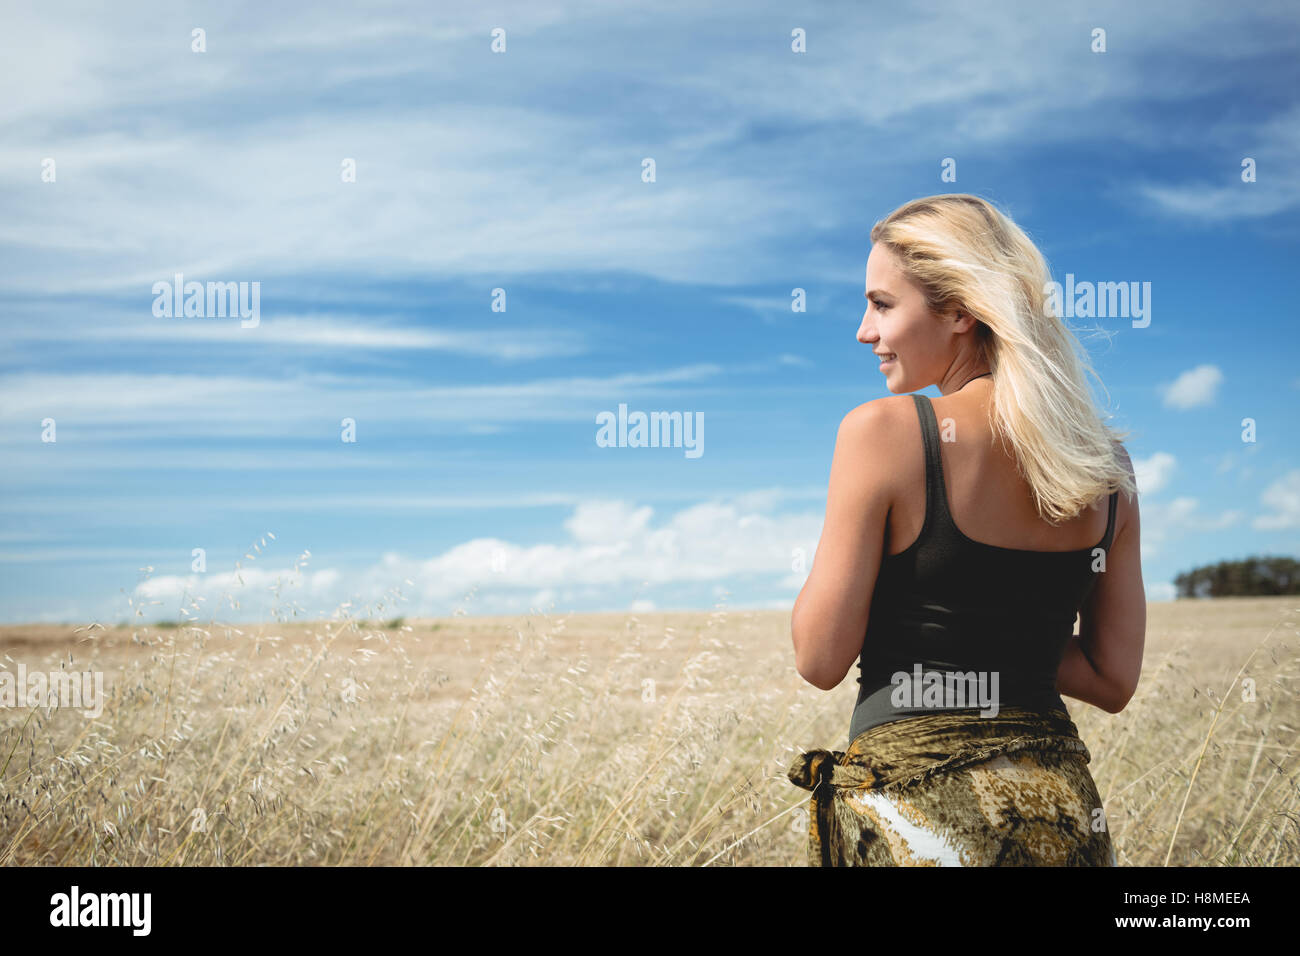 Rear view of blonde woman standing in field Stock Photo